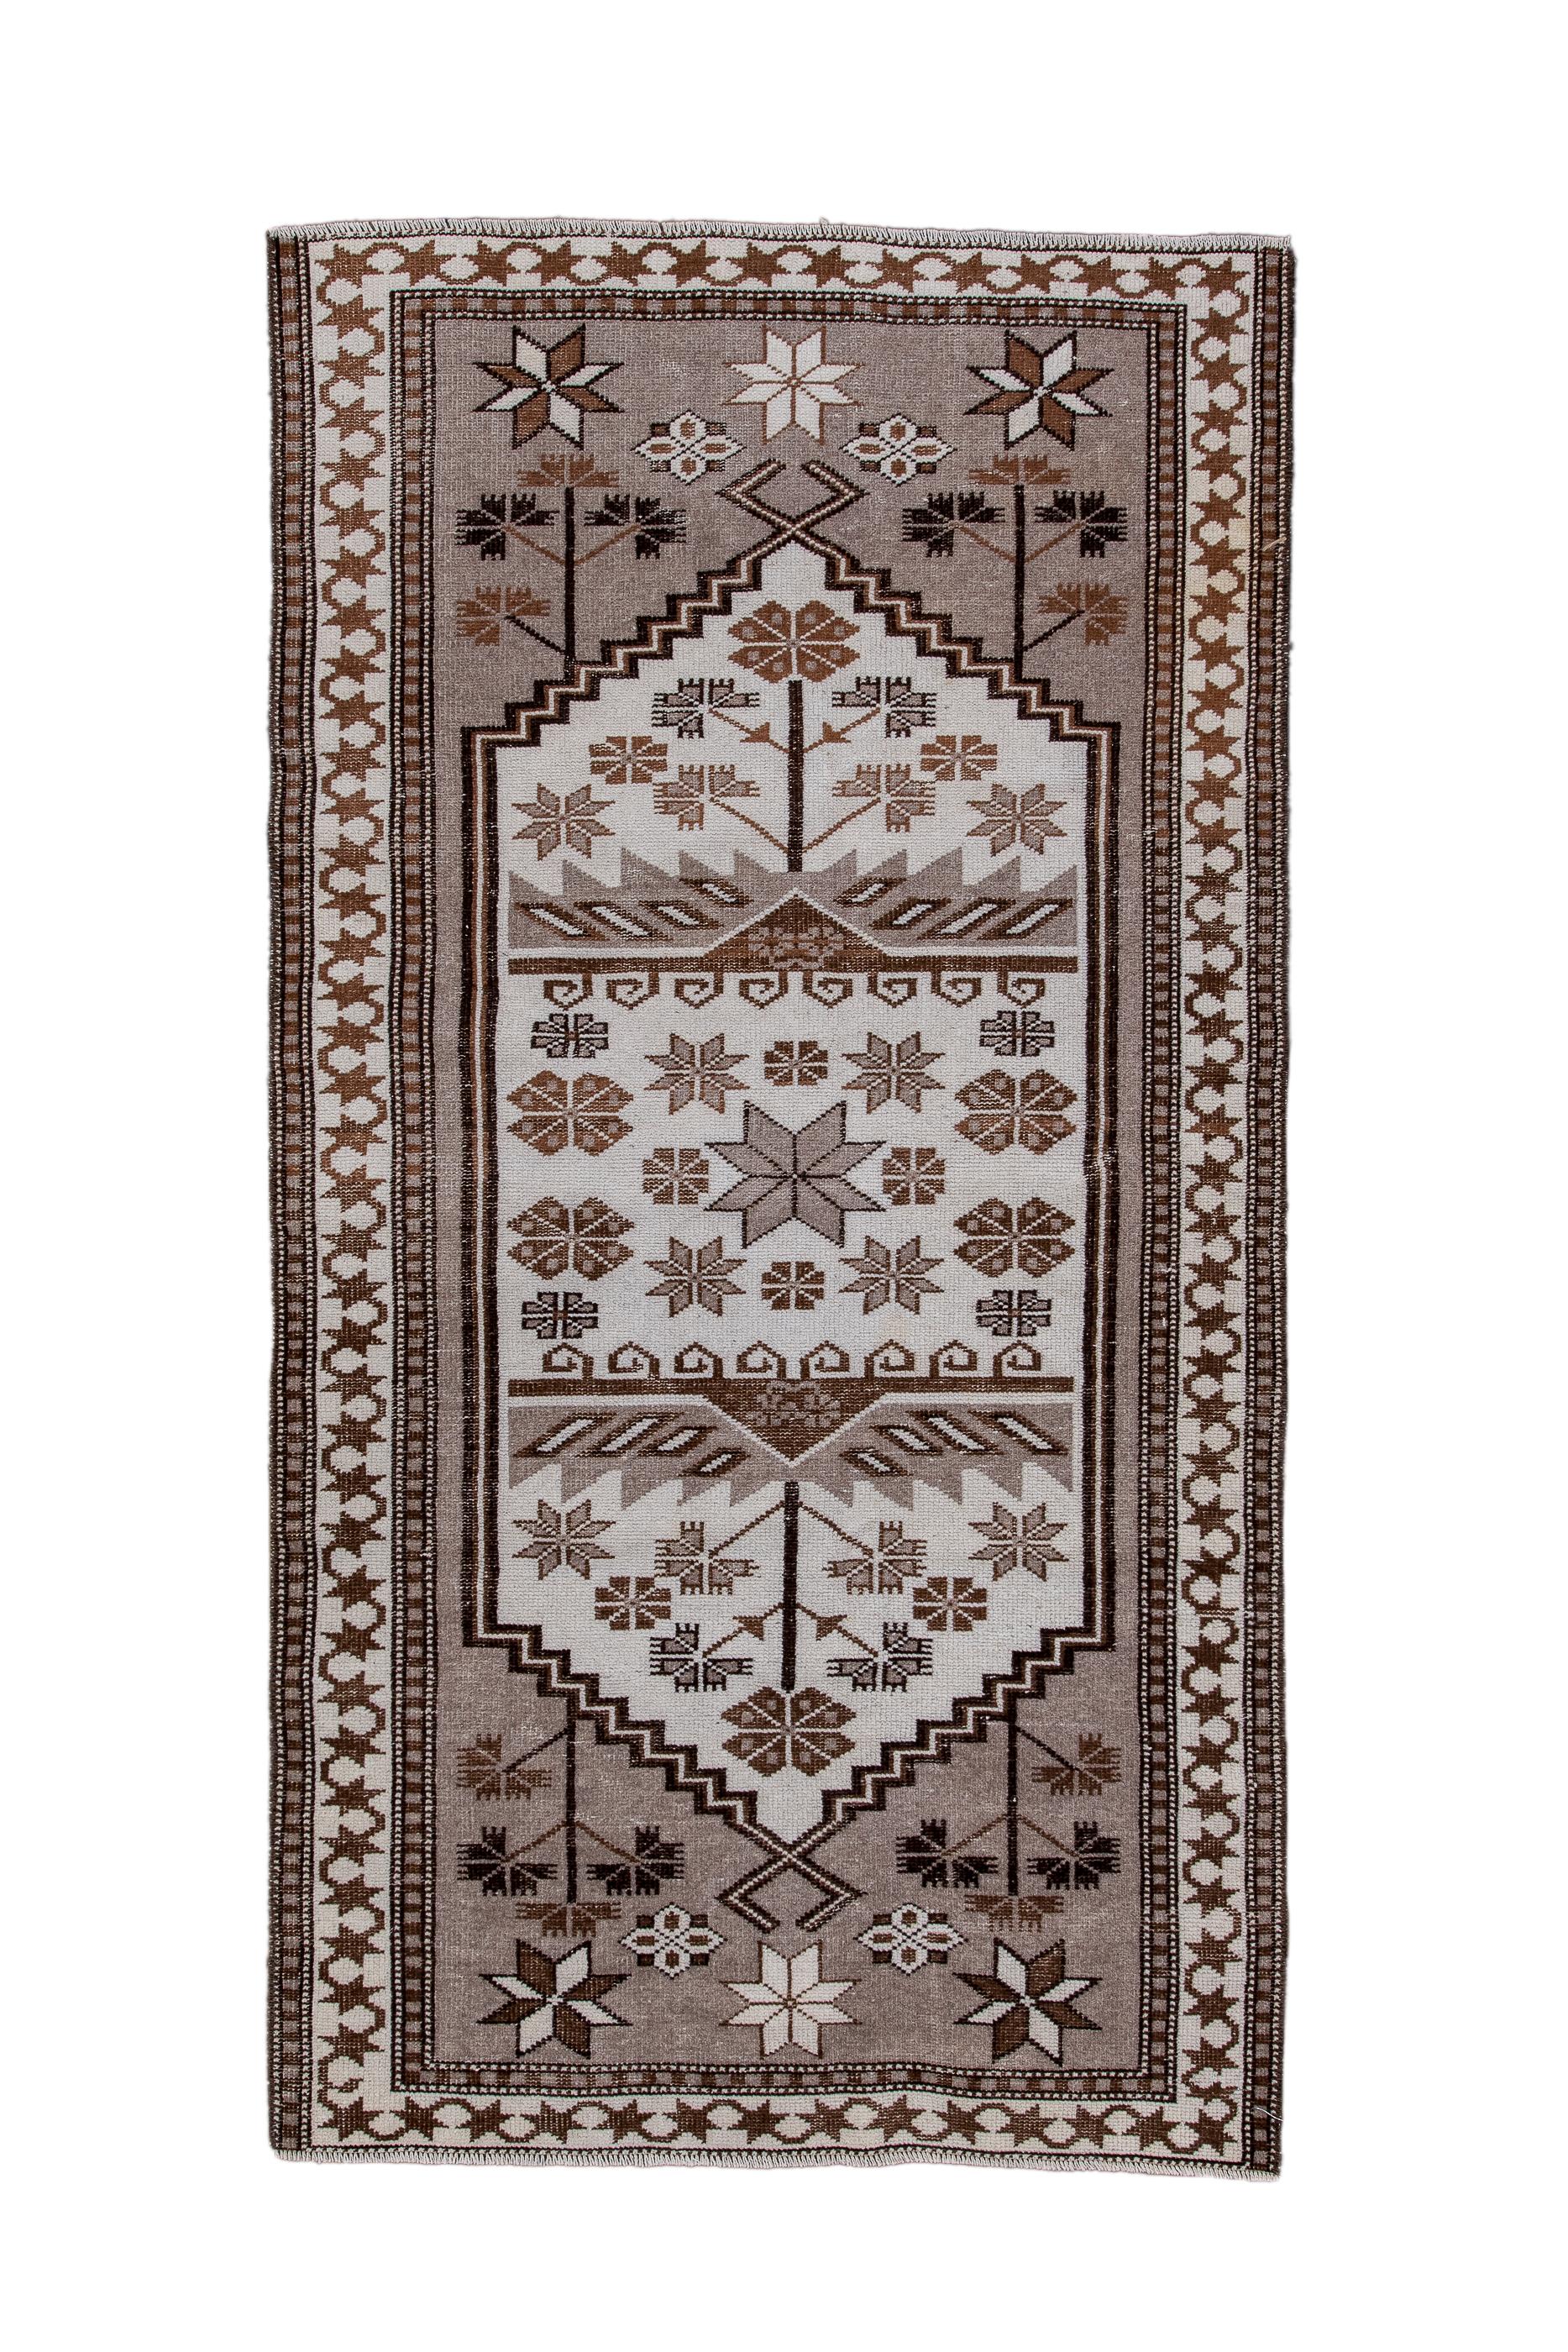 This Bergama from northwest Turkey shows  a grey green field with a tall, central, stepped hexagonal ecru panel decorated with stars, rosettes, carnations, and two broad, sharp-leaf brackets. Stars and carnation plants ornament the corners. Flip